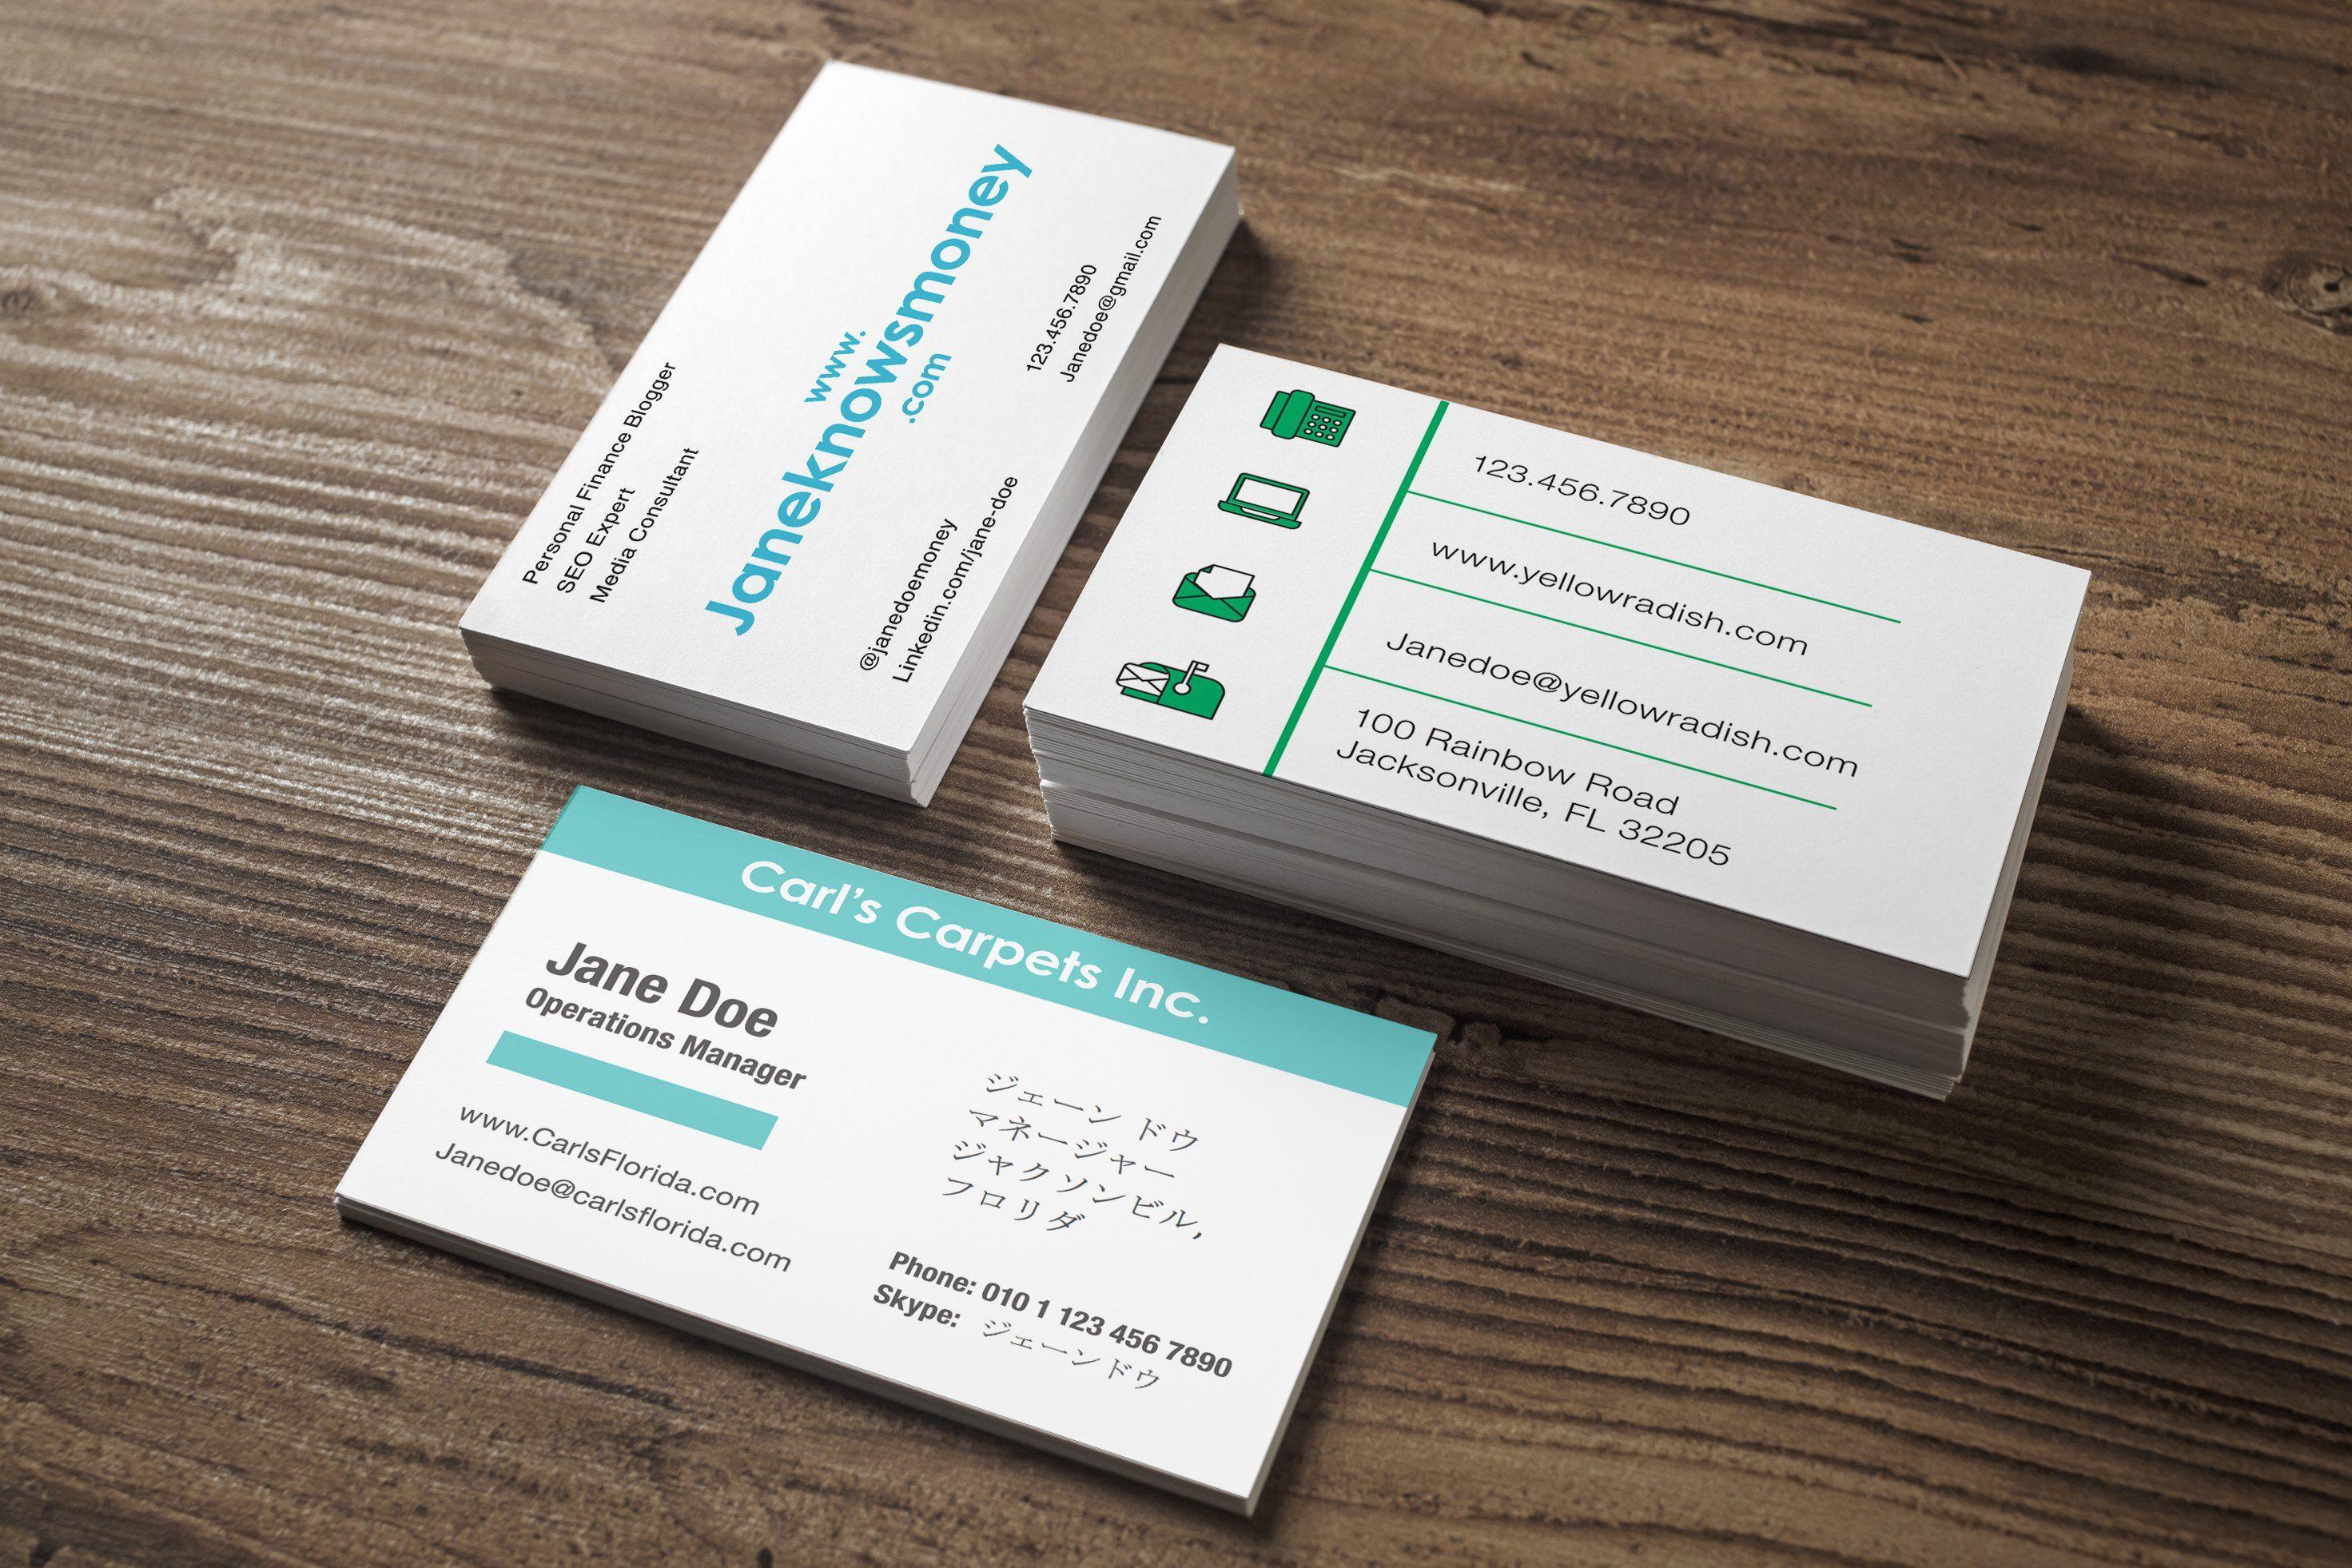 LinkedIn for Business Cards Logo - Business Card Template: How to Make a Card That Stands Out | Money